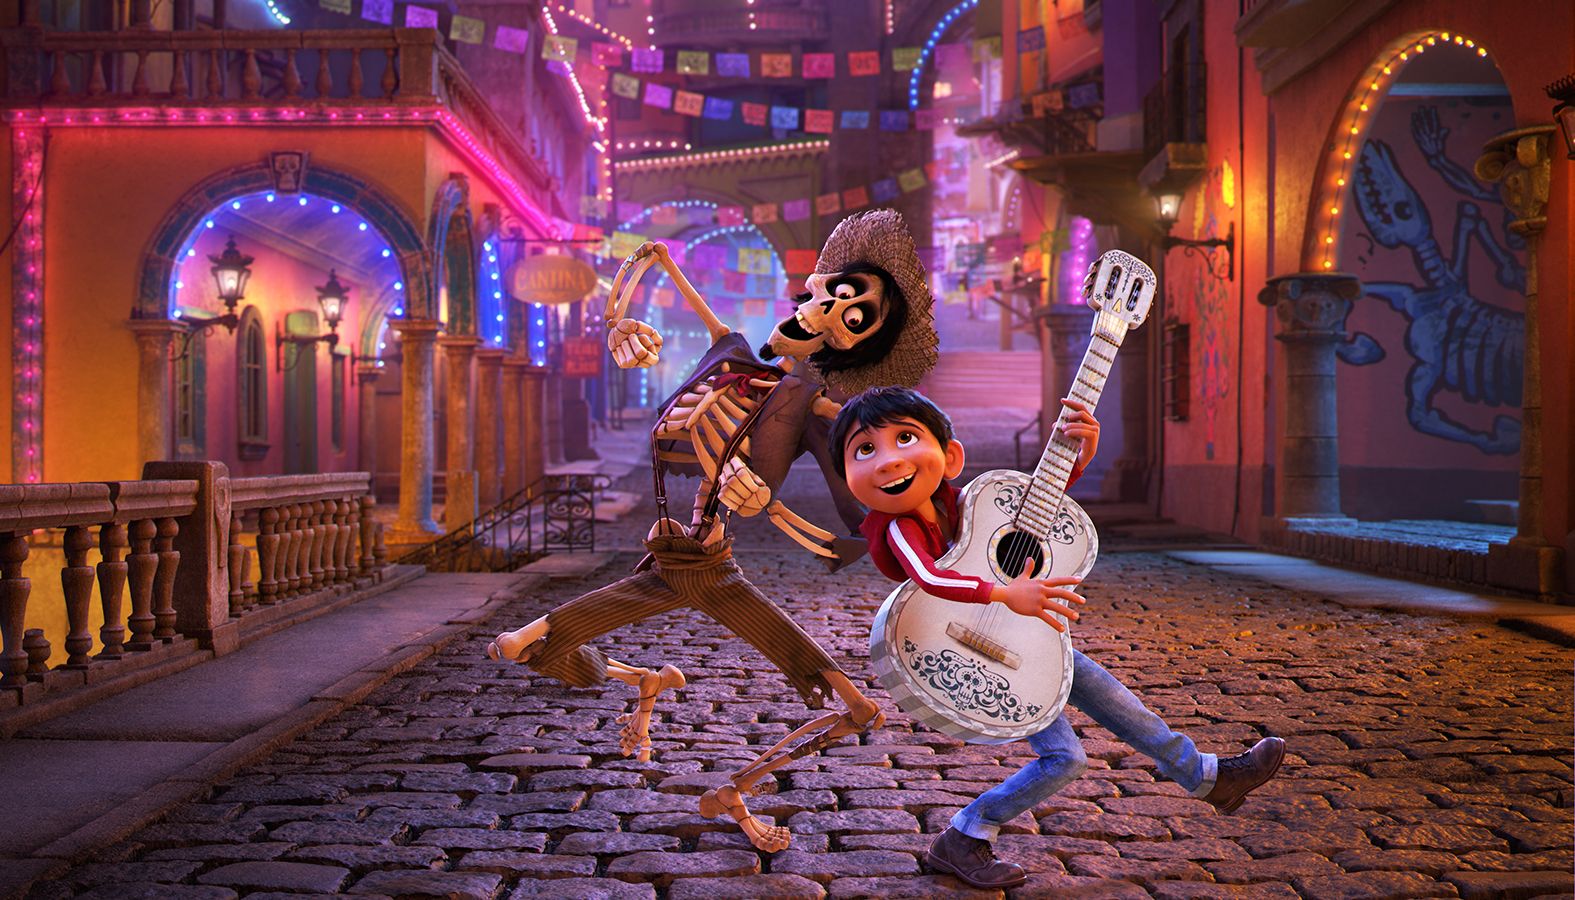 11 'Coco' Halloween Costume Ideas - Outfits Inspired By Pixar